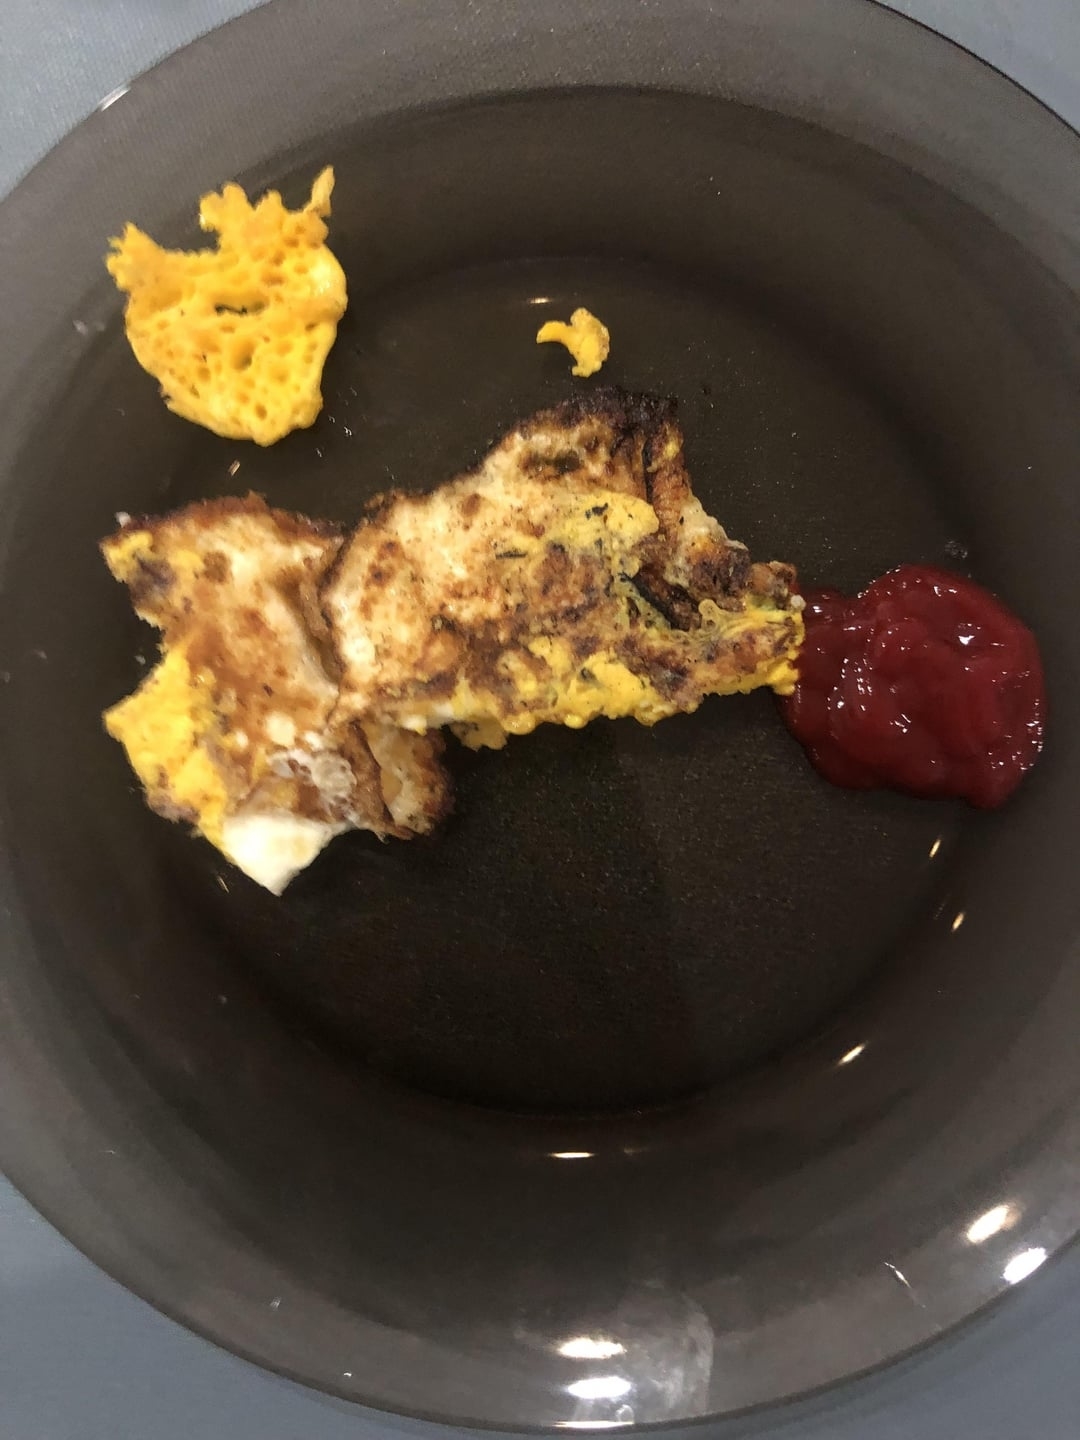 Burnt scrambled eggs with a side of ketchup on a plate